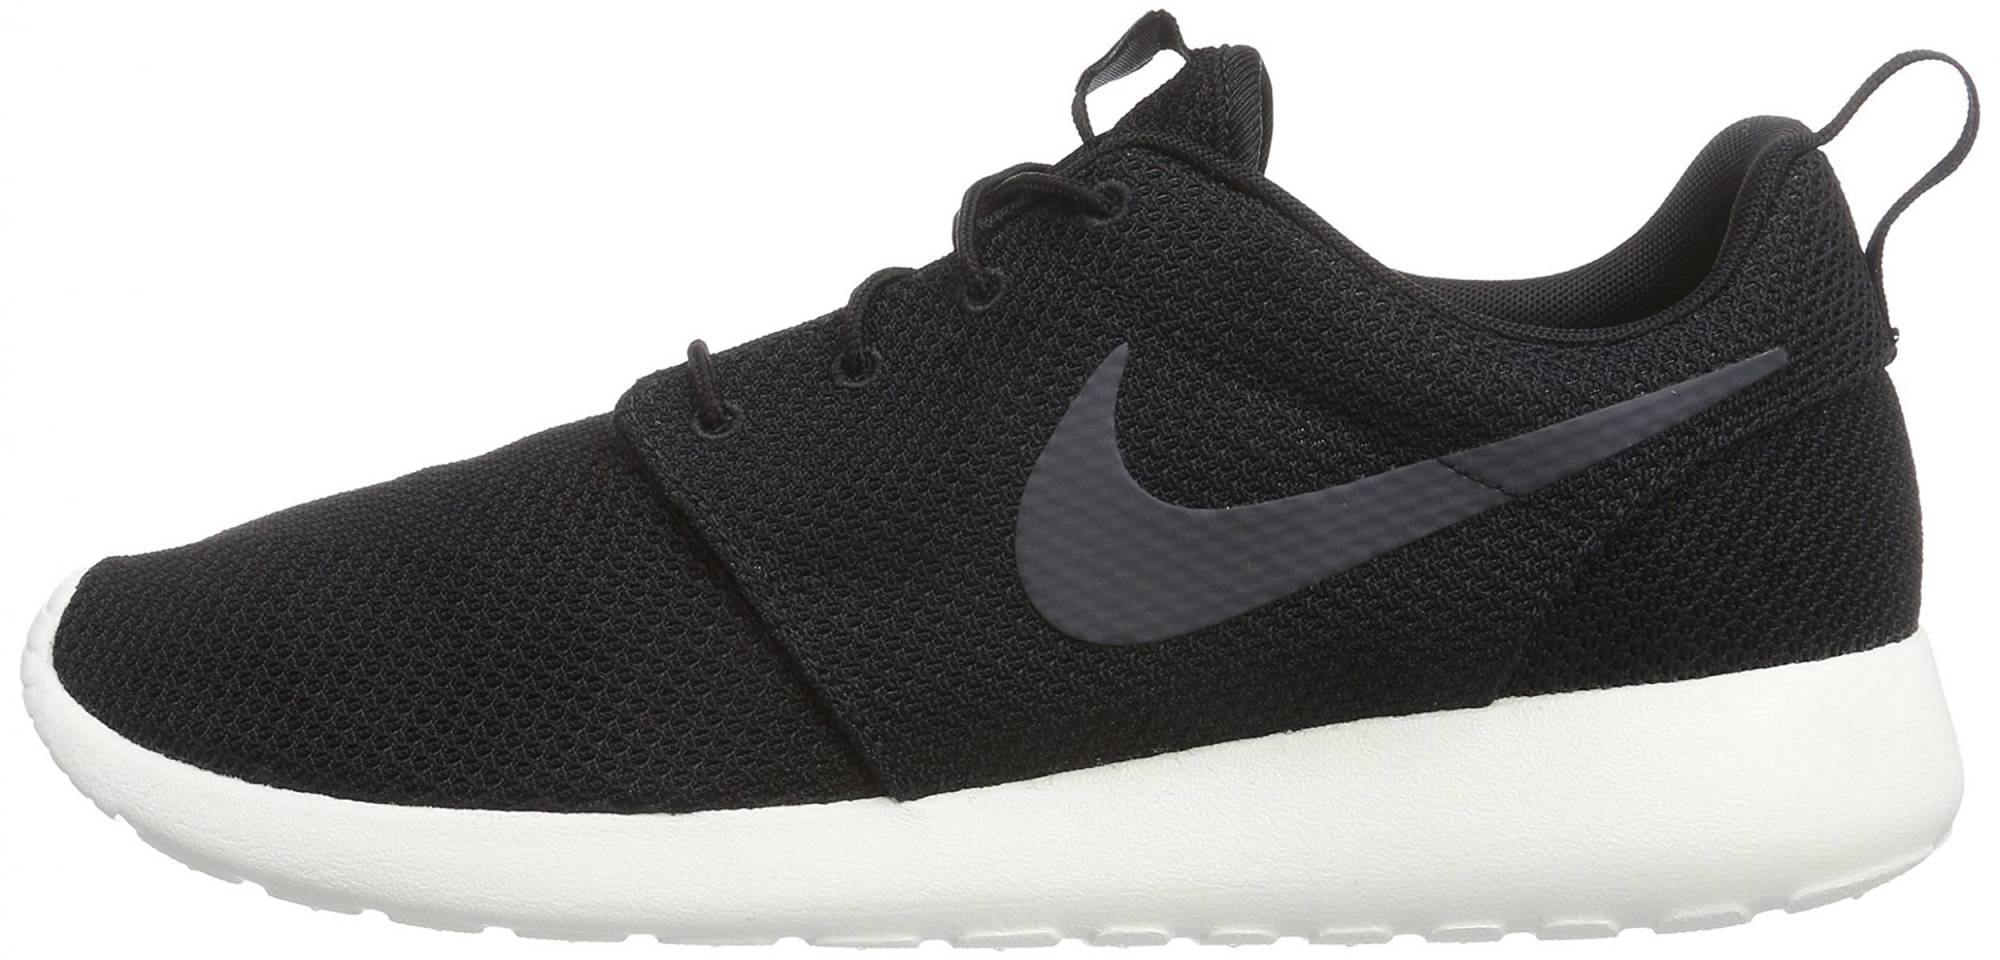 Nike Roshe One – Shoes Reviews & Reasons To Buy